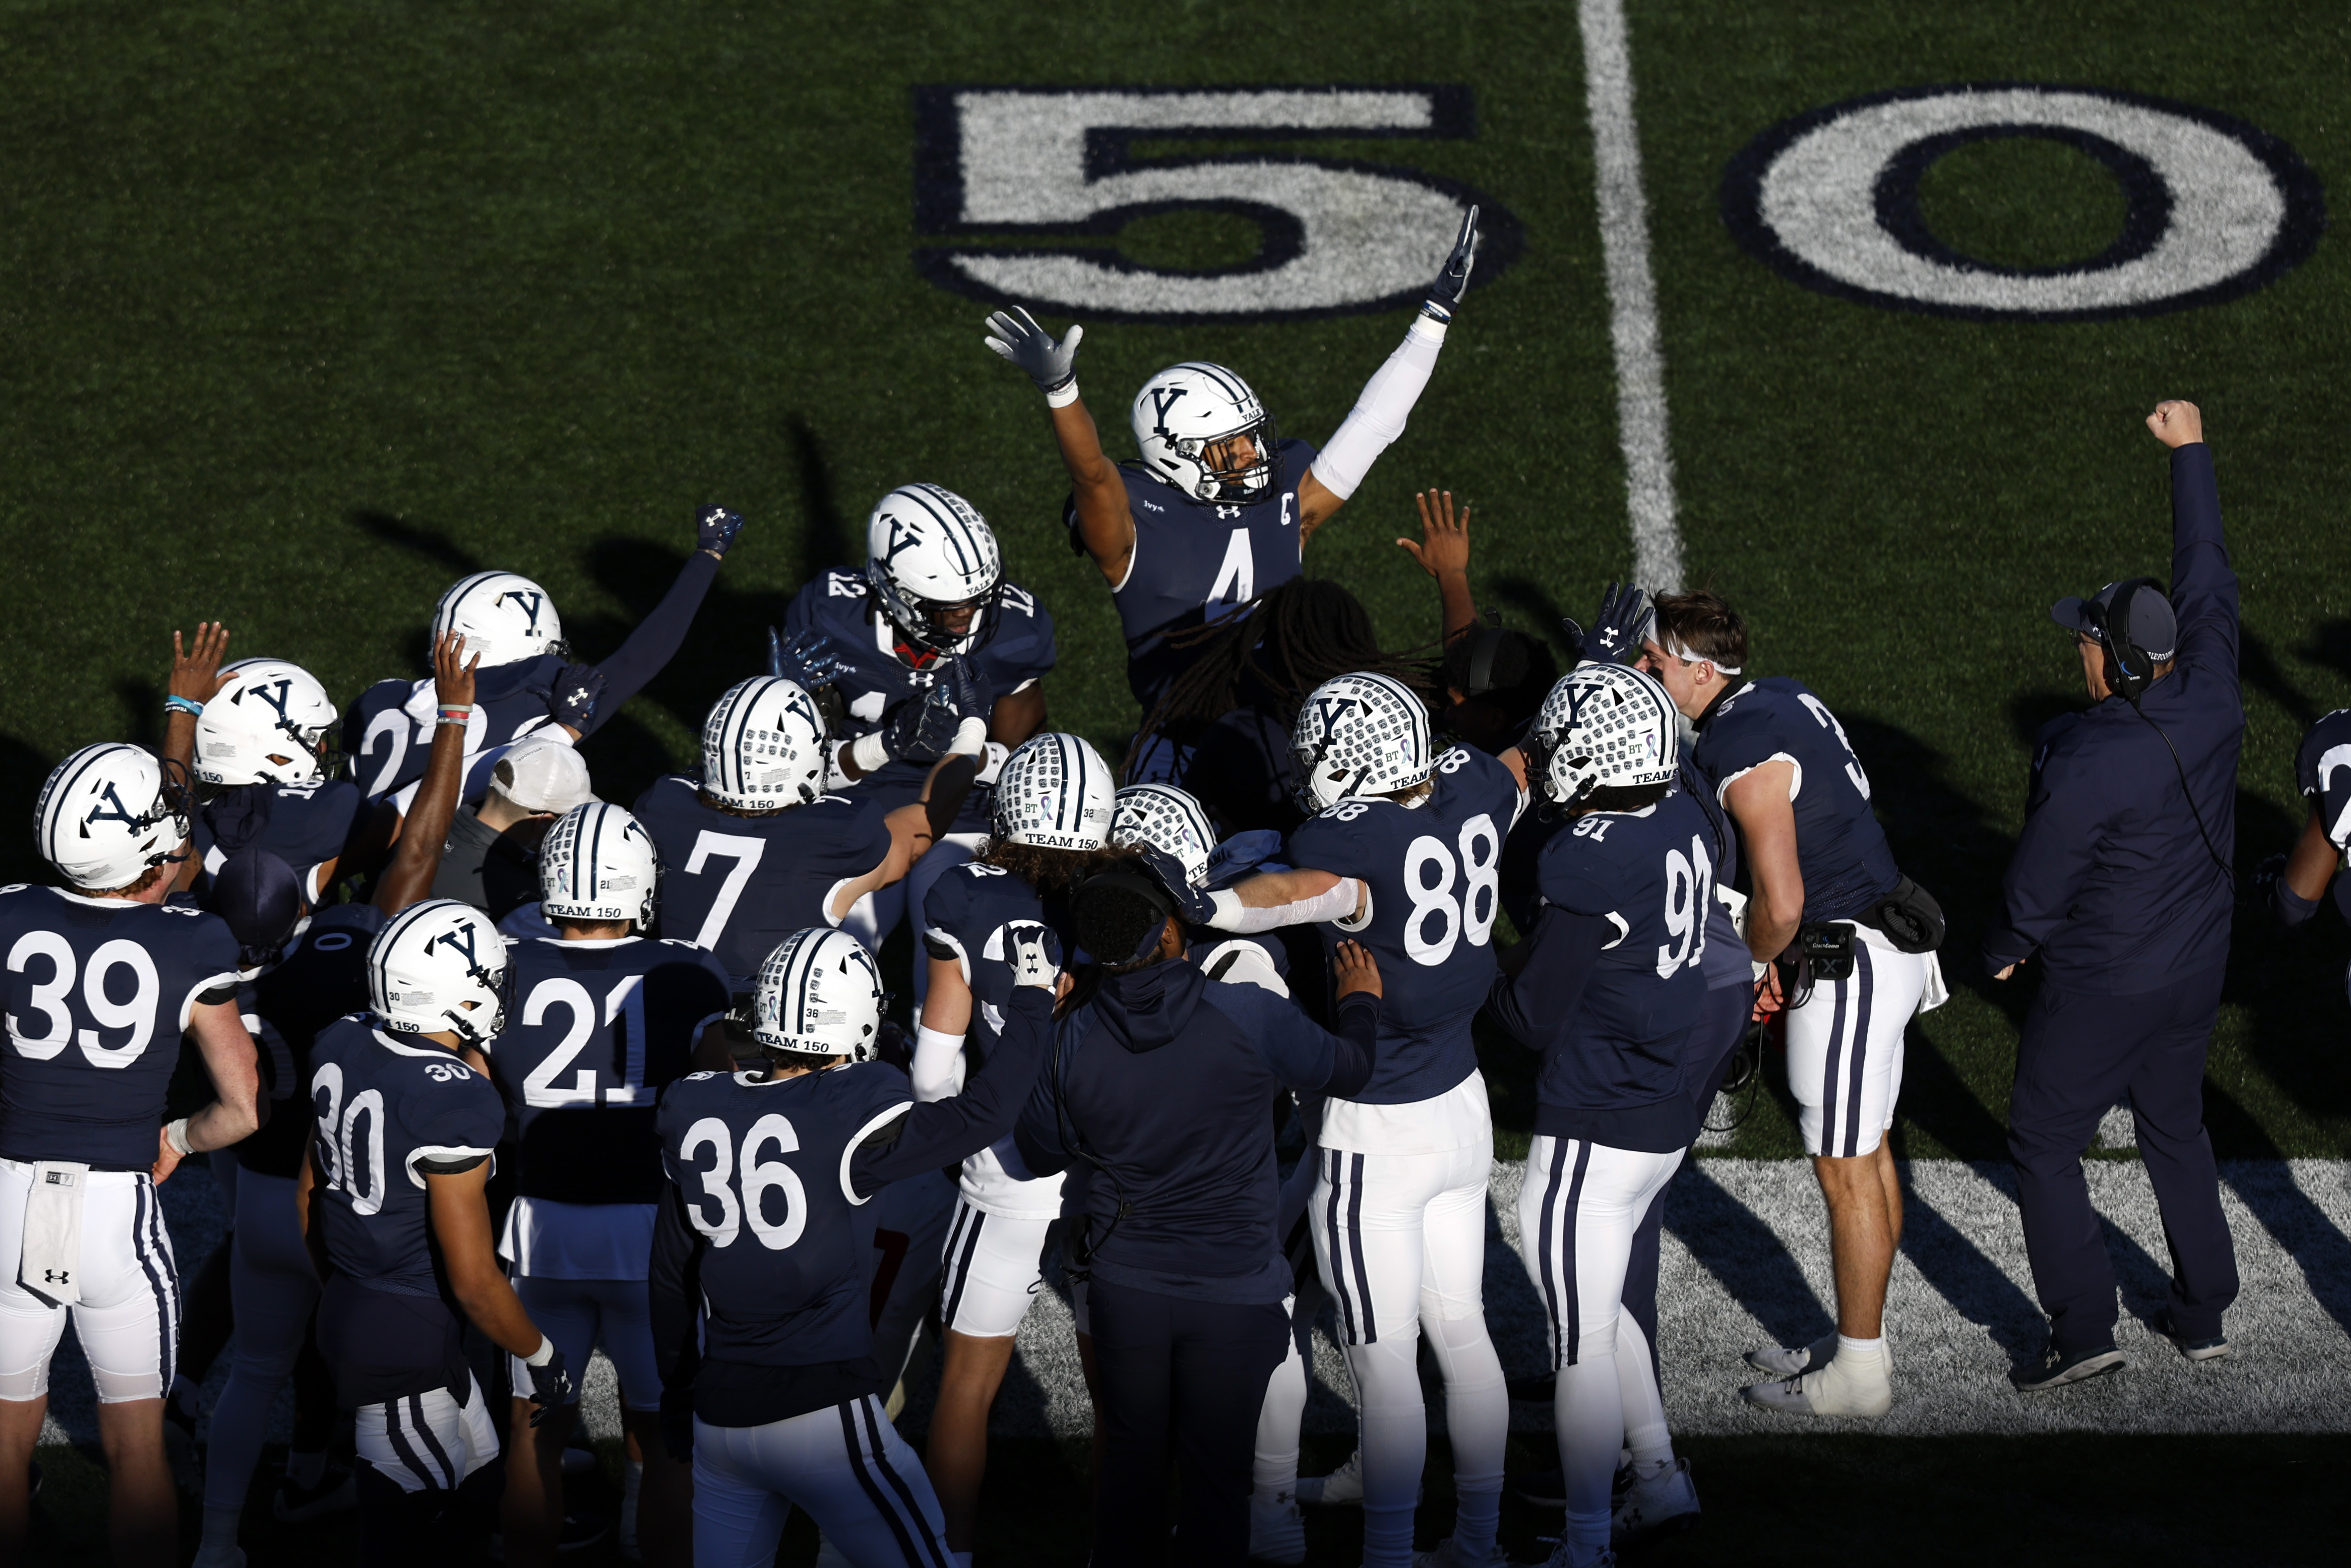 Ivy League champion Yale football heavy favorites for 2023 in rankings